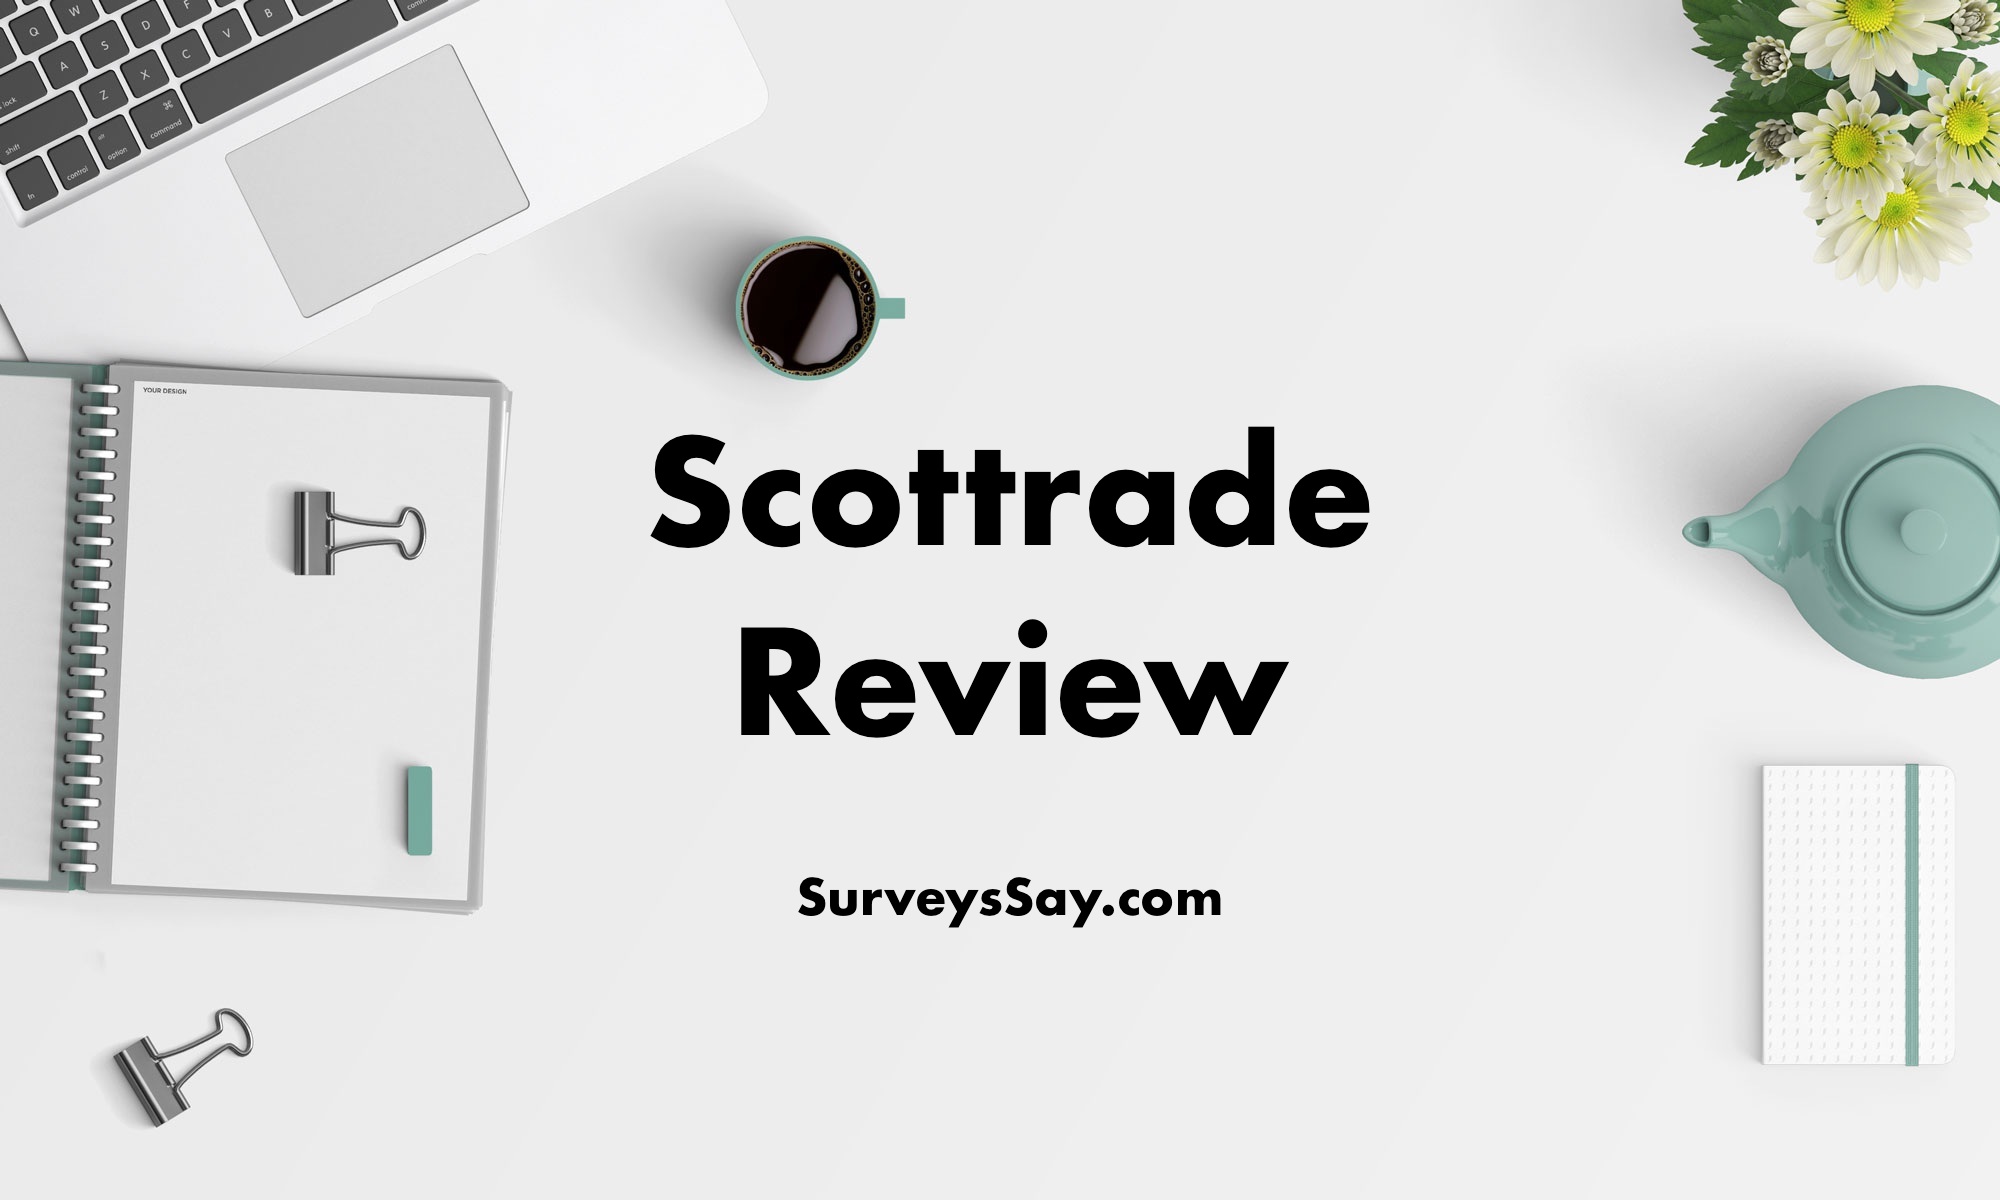 Scottrade Review 2018 | What You Should Know Before Joining